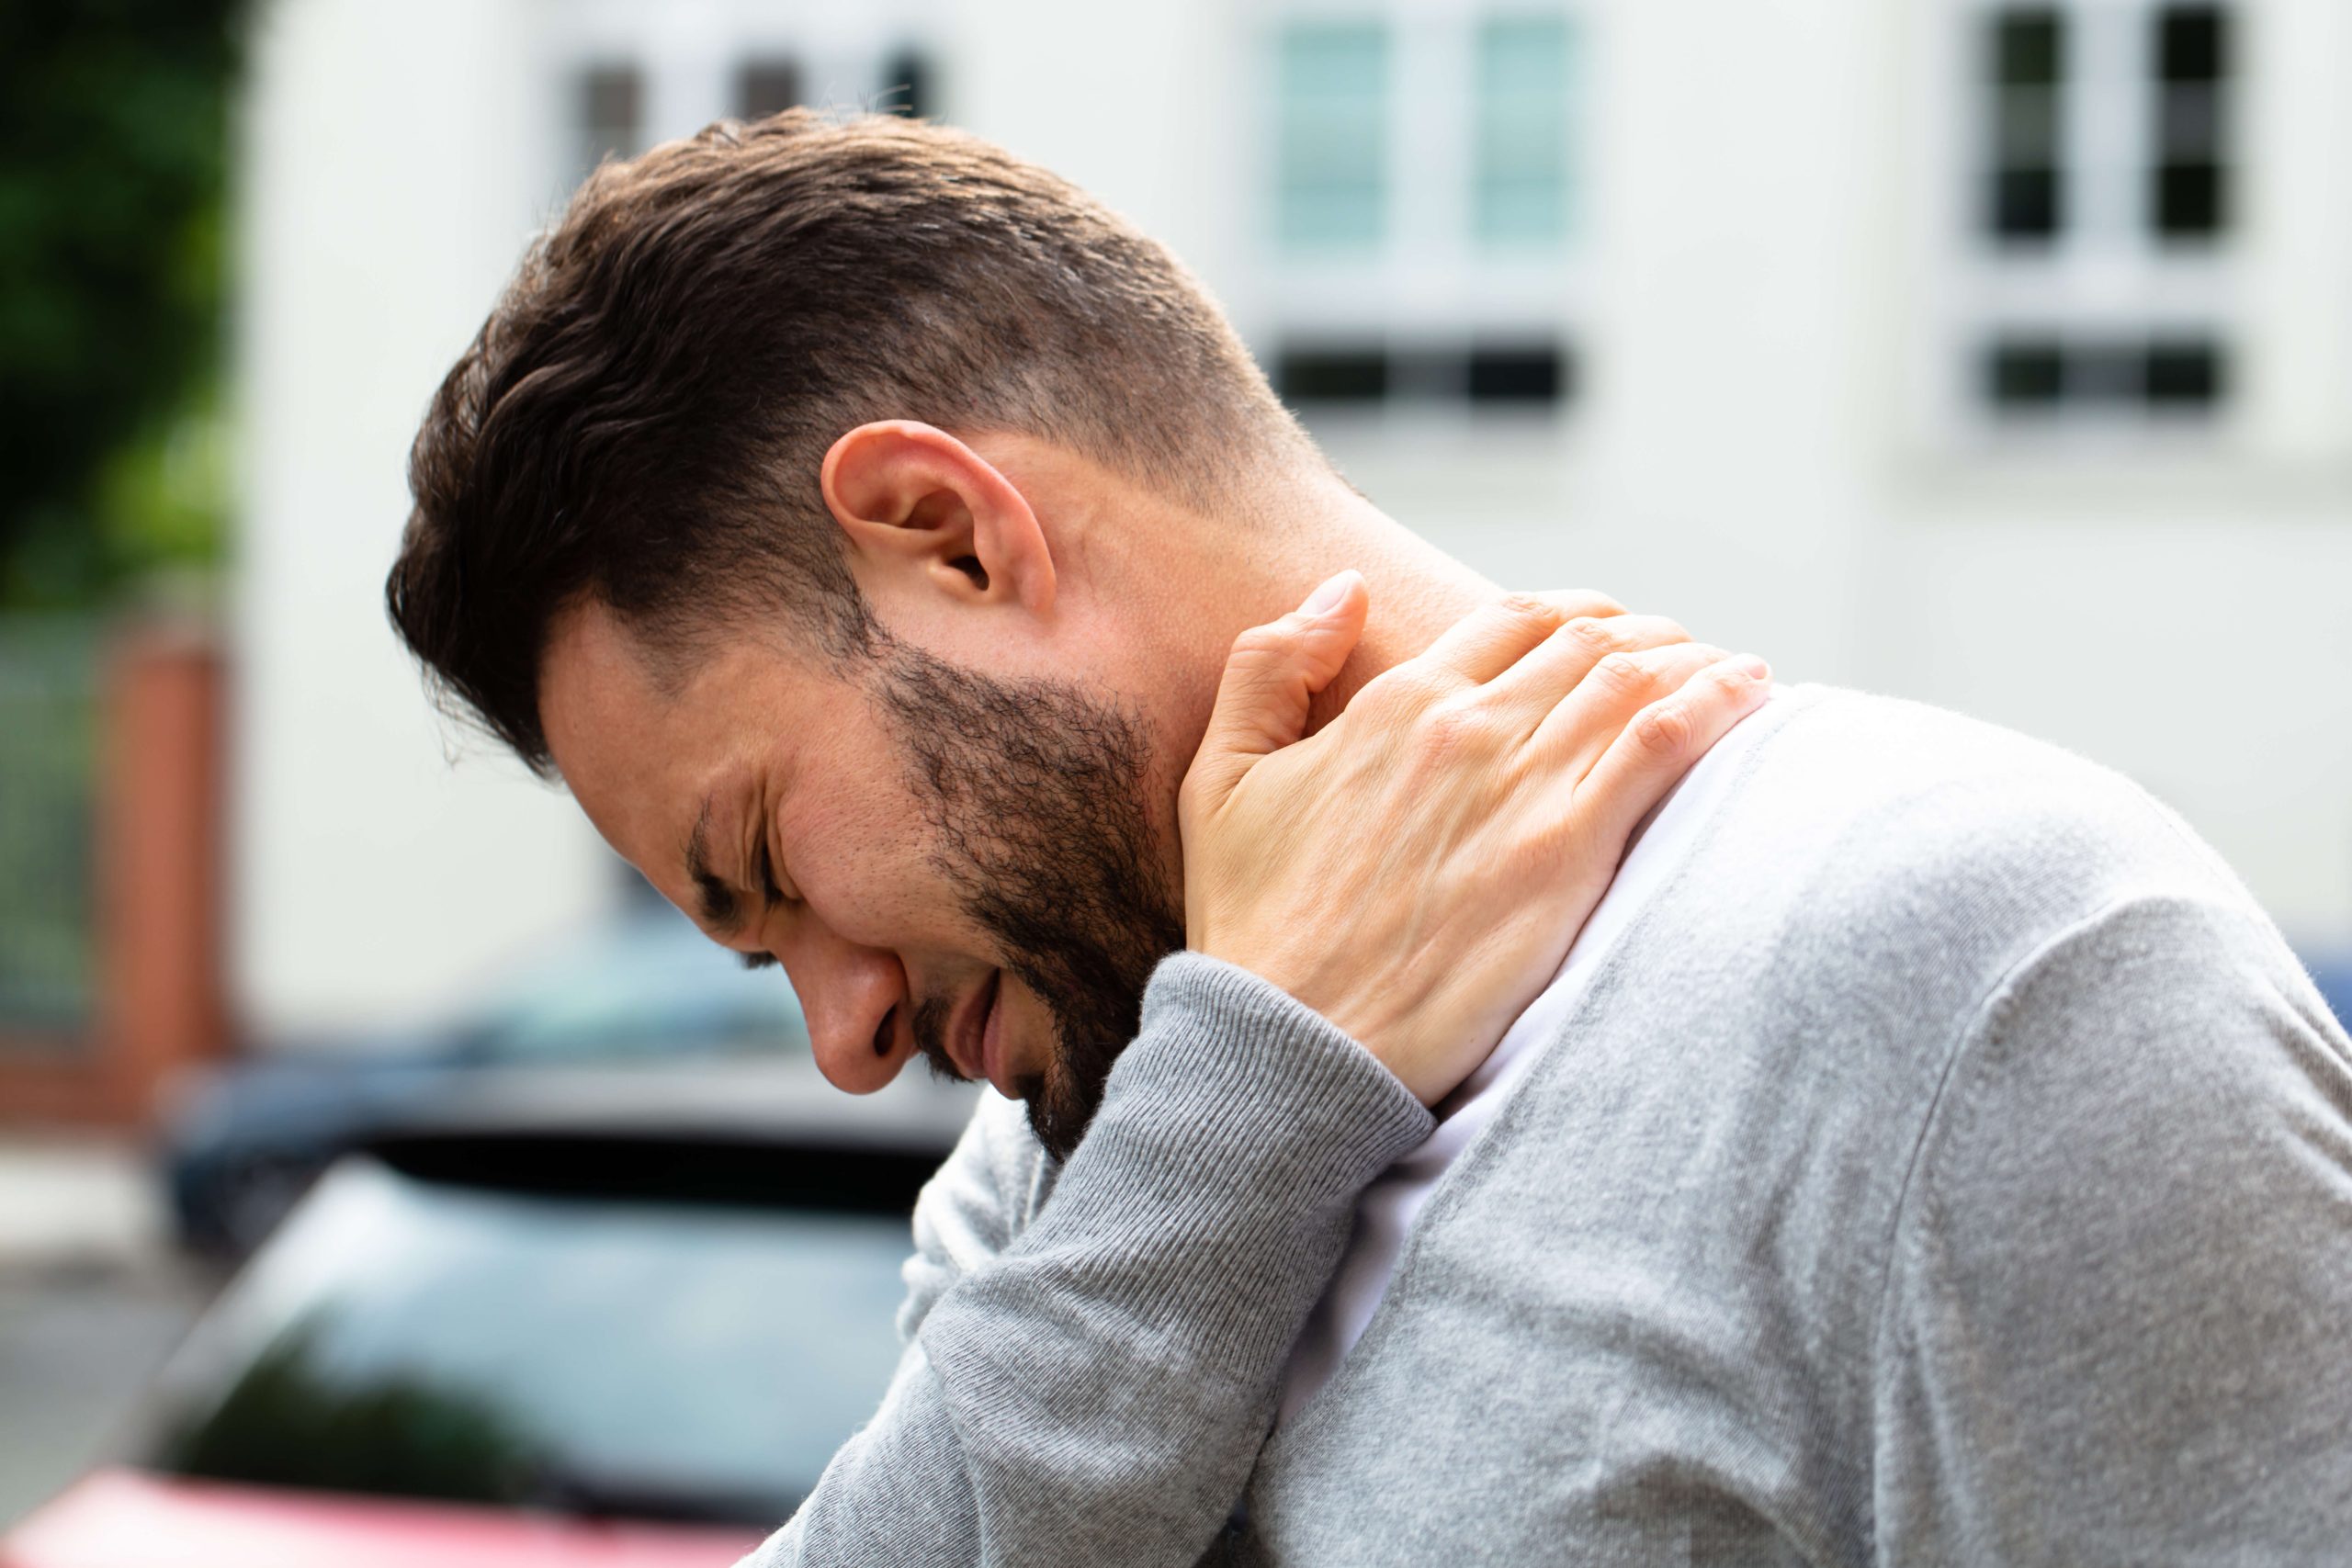 Relieving Neck Pain with CBN